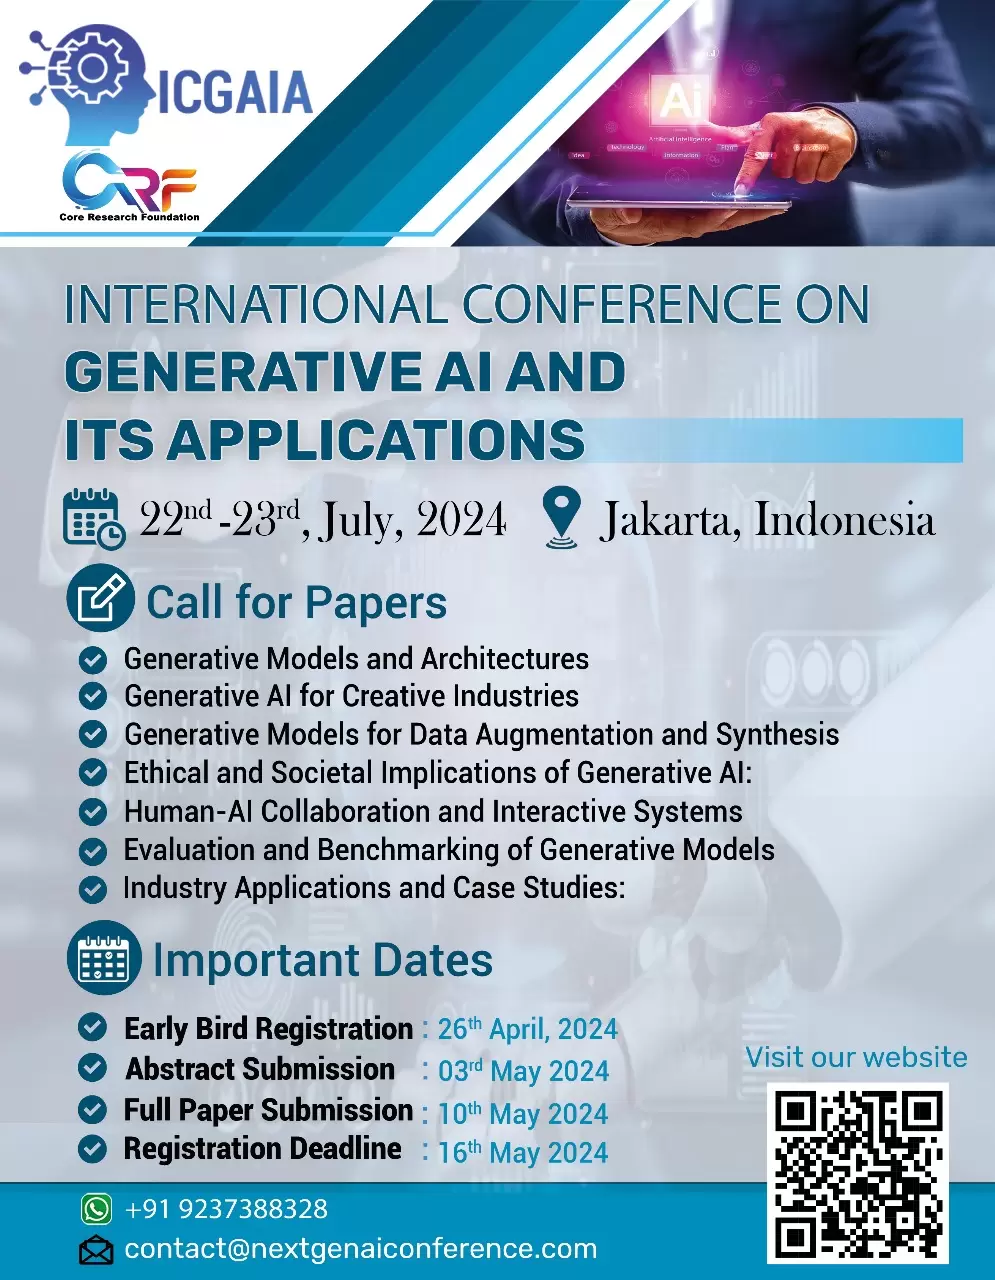 International Conference on Generative AI and its Application